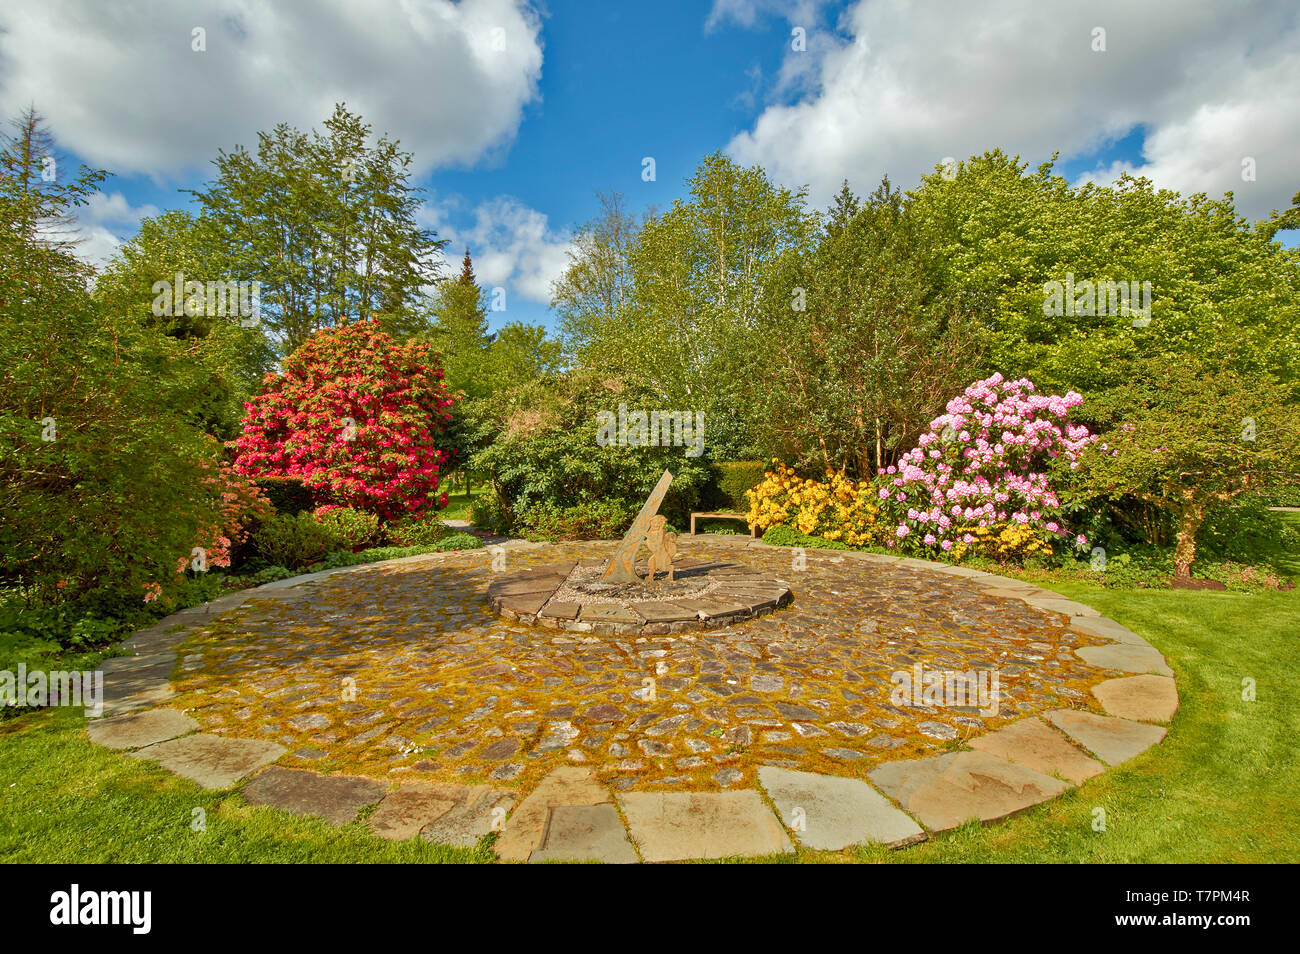 ATTADALE GARDENS STRATHCARRON WESTER ROSS SCOTLAND  IN SPRINGTIME WITH LARGE  SUN DIAL AND A WILDCAT HOLDING THE GNOMON Stock Photo